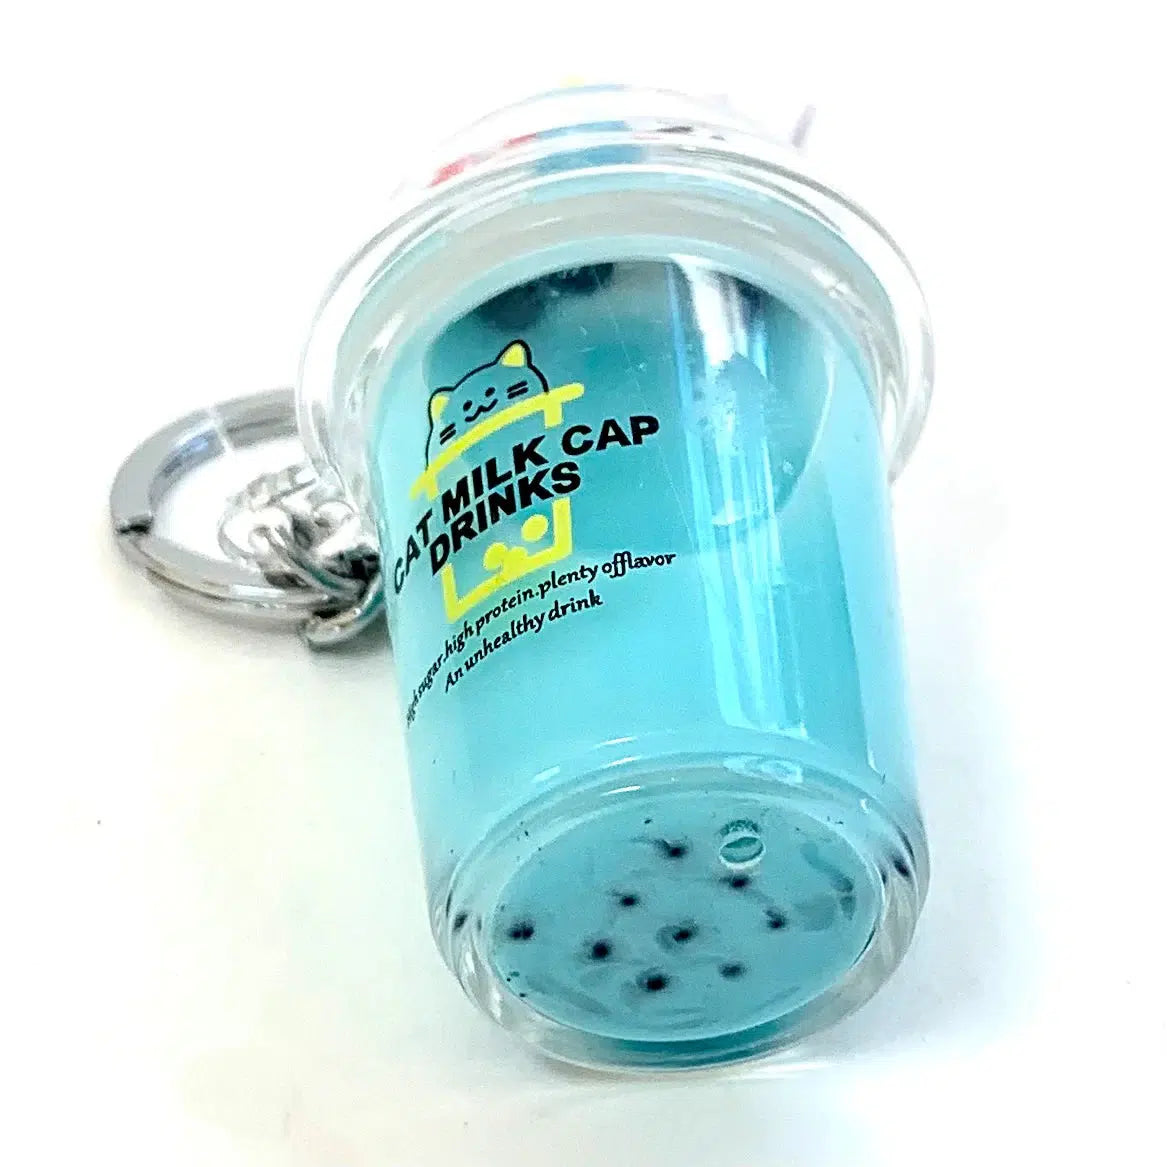 Front view of boba cat with blue liquid laying on its side showing the bobas at bottom of cup.